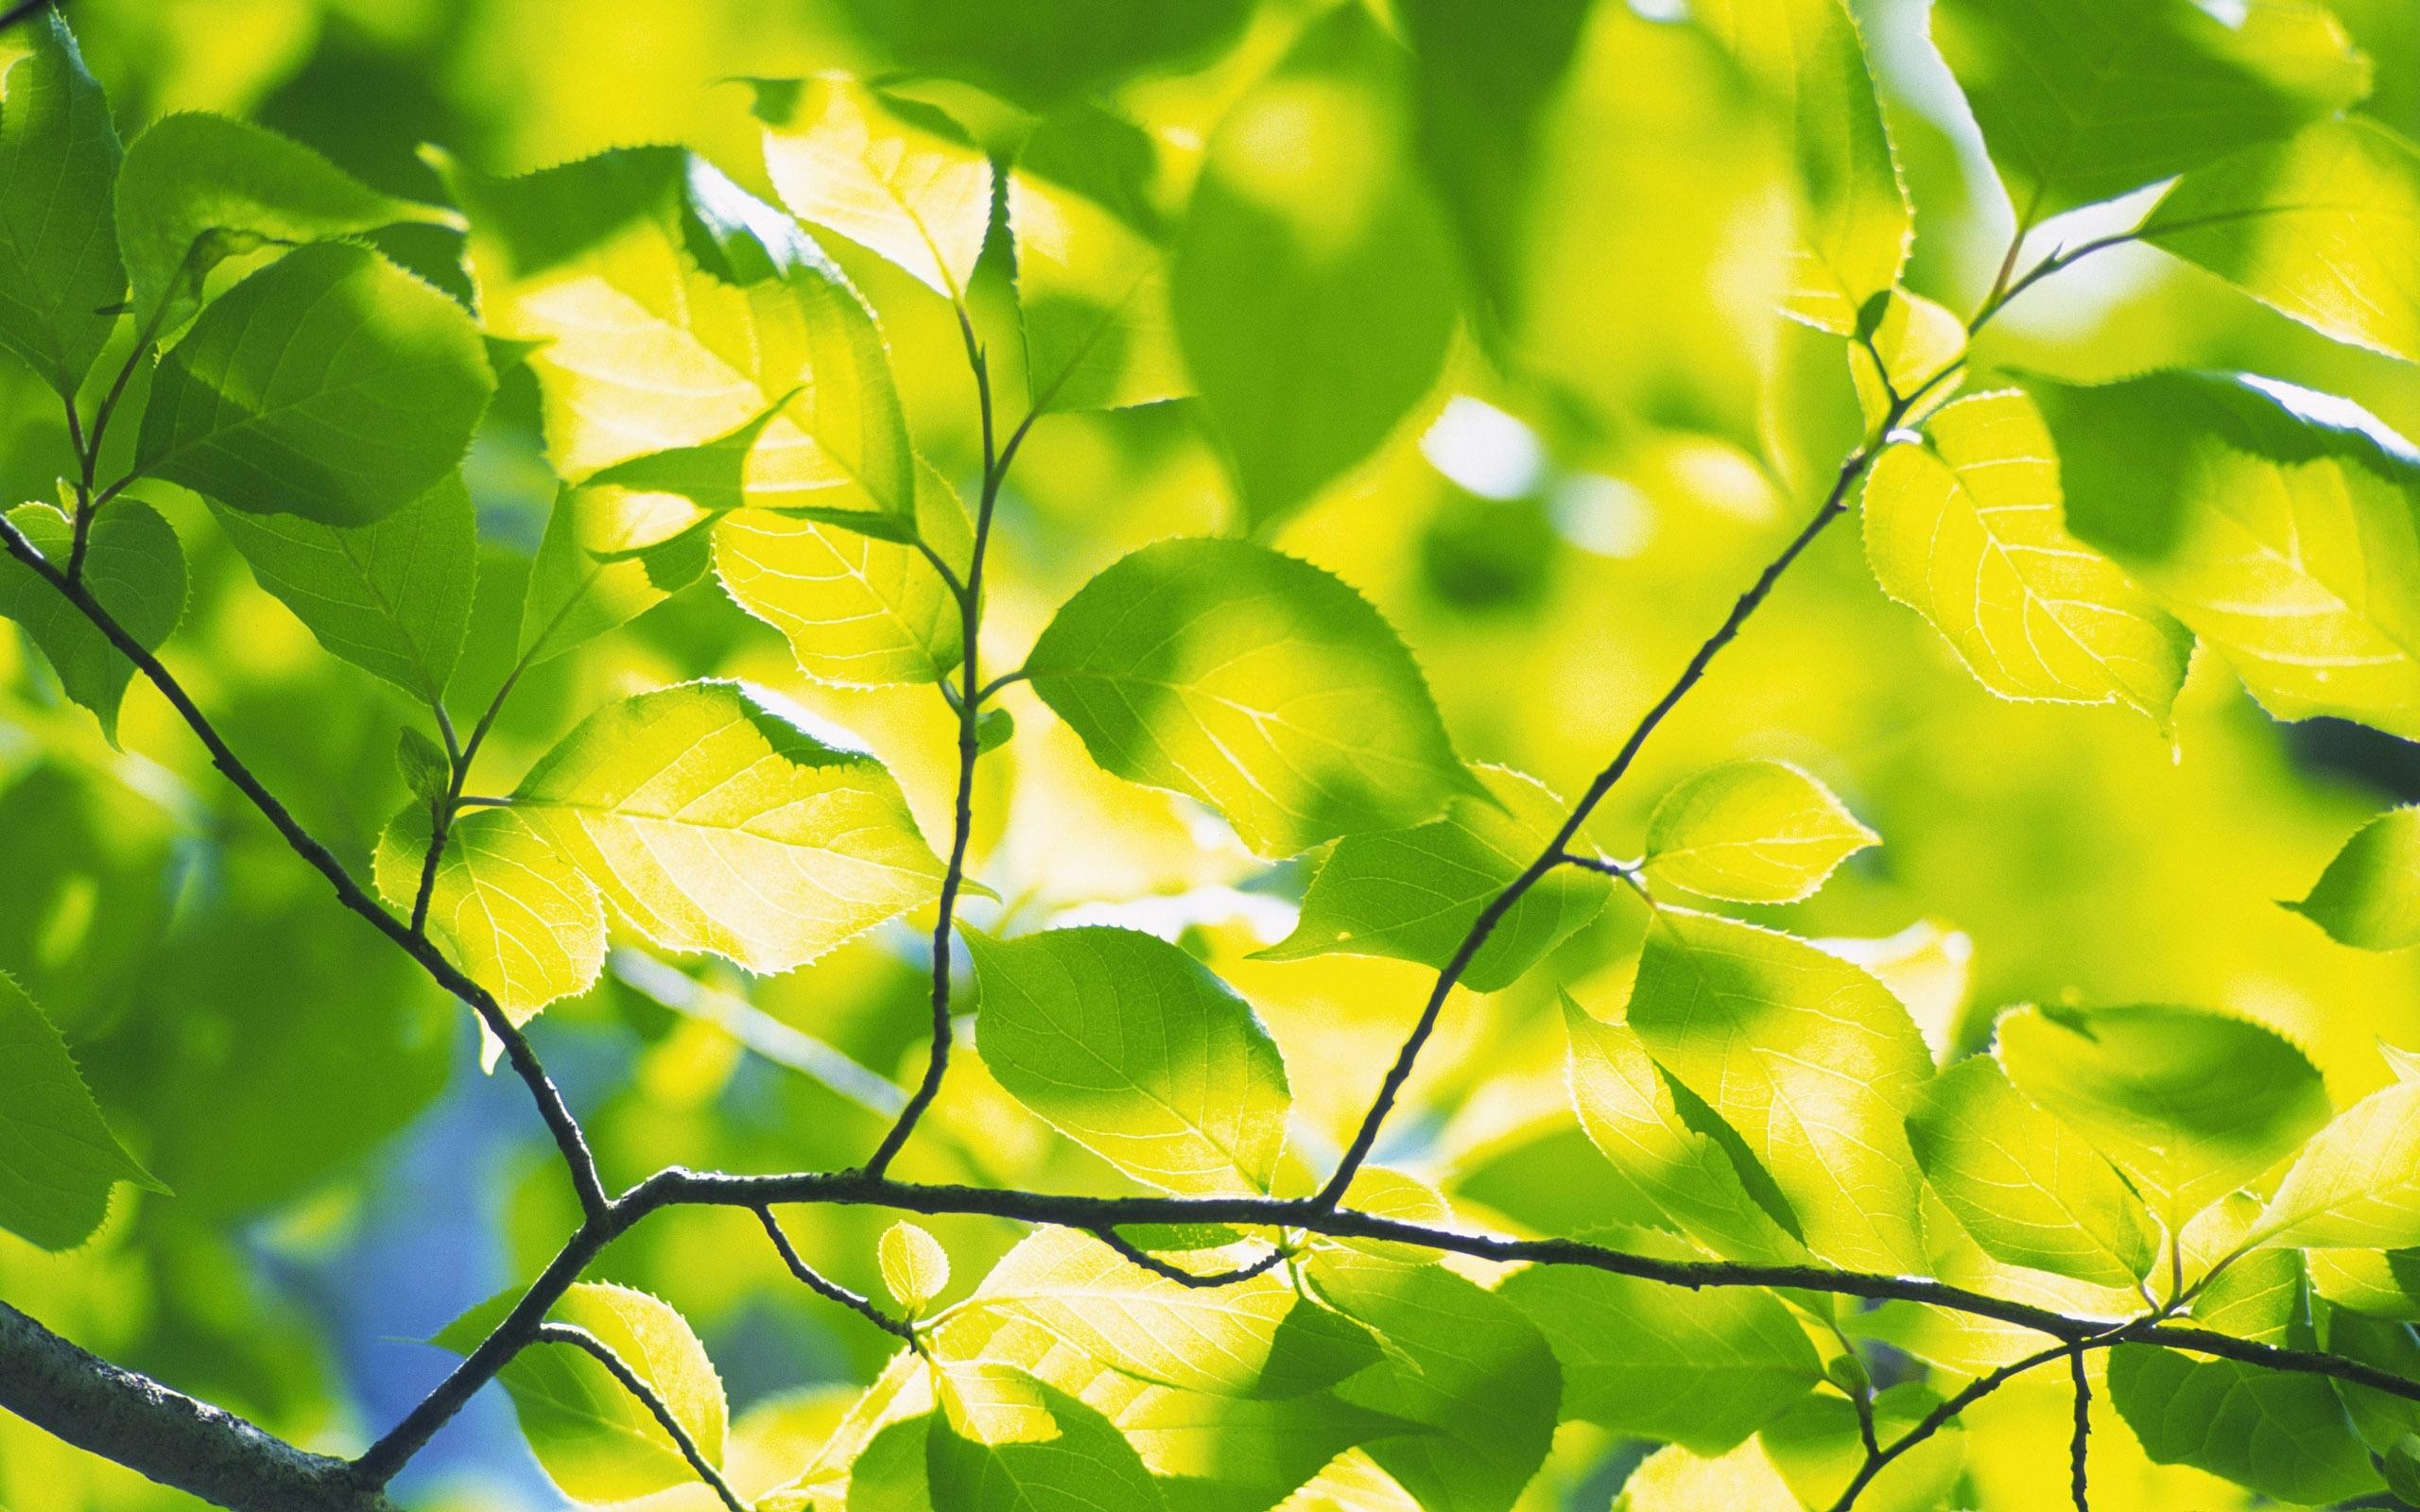 Beautiful Leavs On Tree Branches - Lime Green Color Nature - HD Wallpaper 